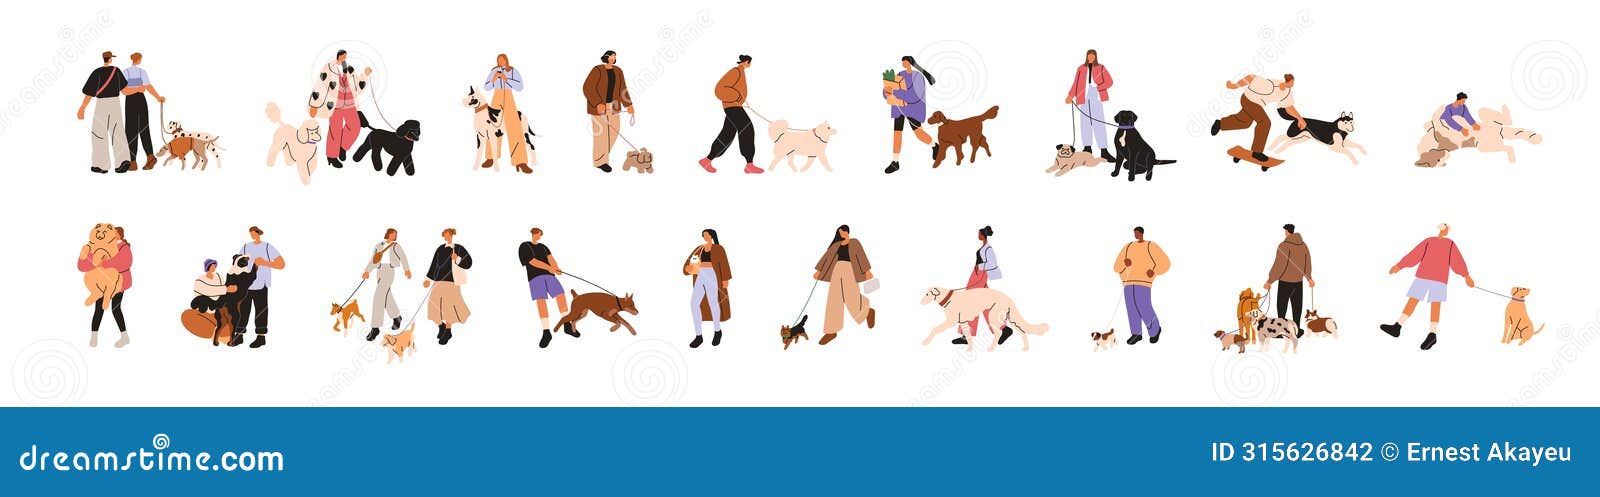 people walking with dogs. pet owners leading puppies outdoors set. characters strolling with companion animals, doggies